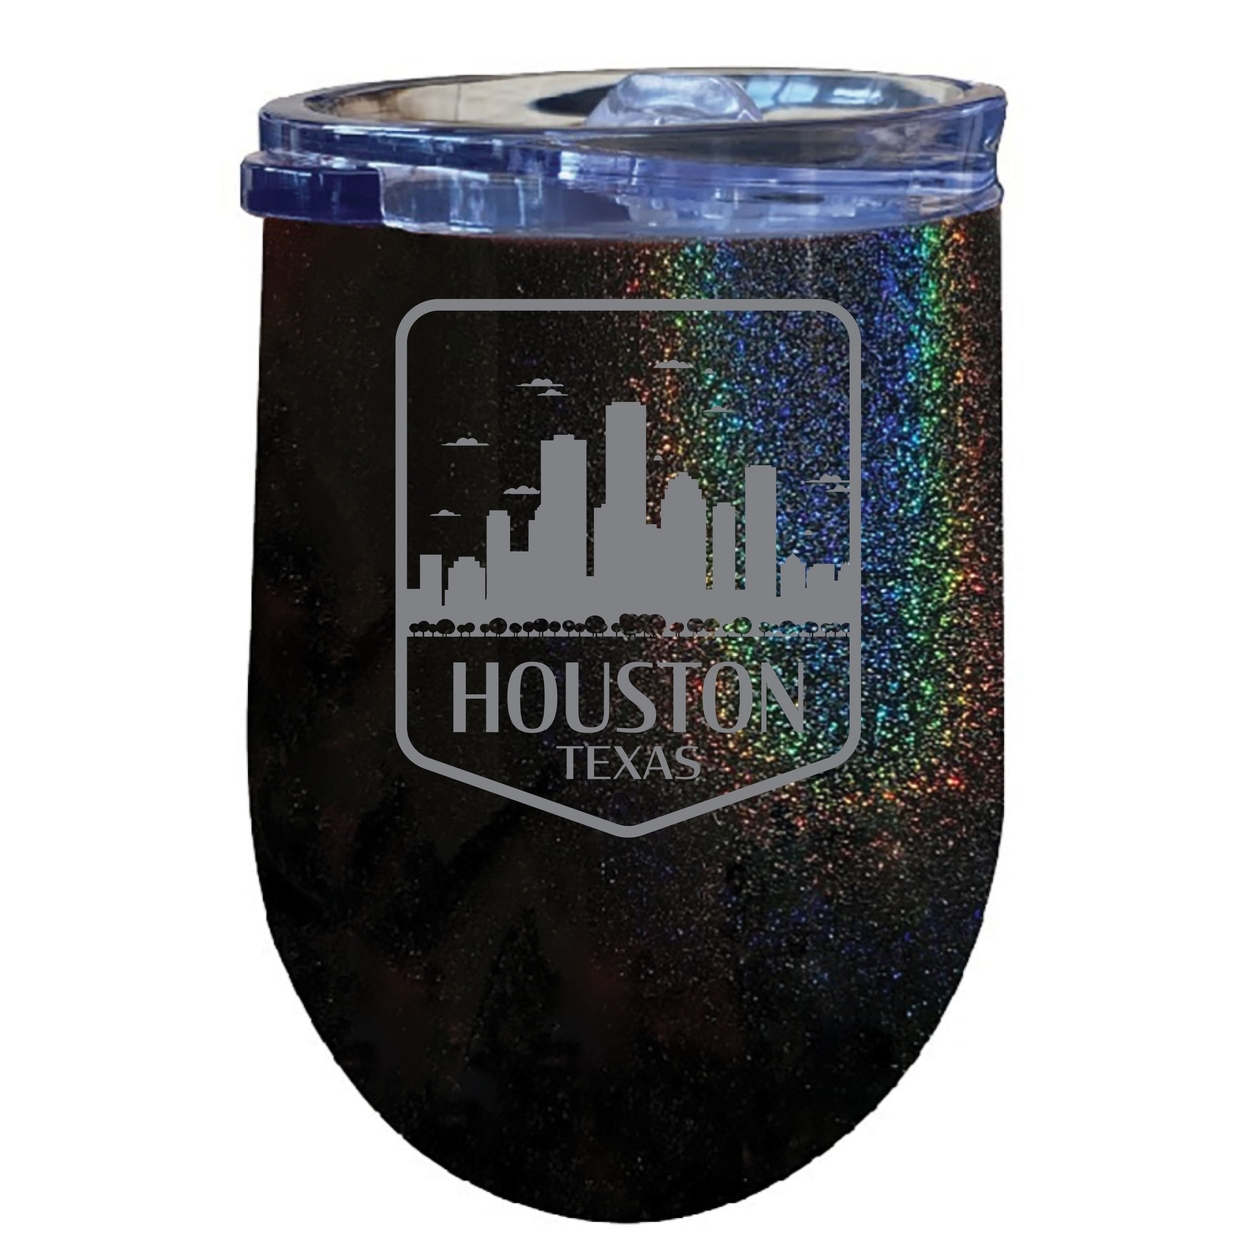 Houston Texas Souvenir 12 Oz Engraved Insulated Wine Stainless Steel Tumbler - Purple,,2-Pack